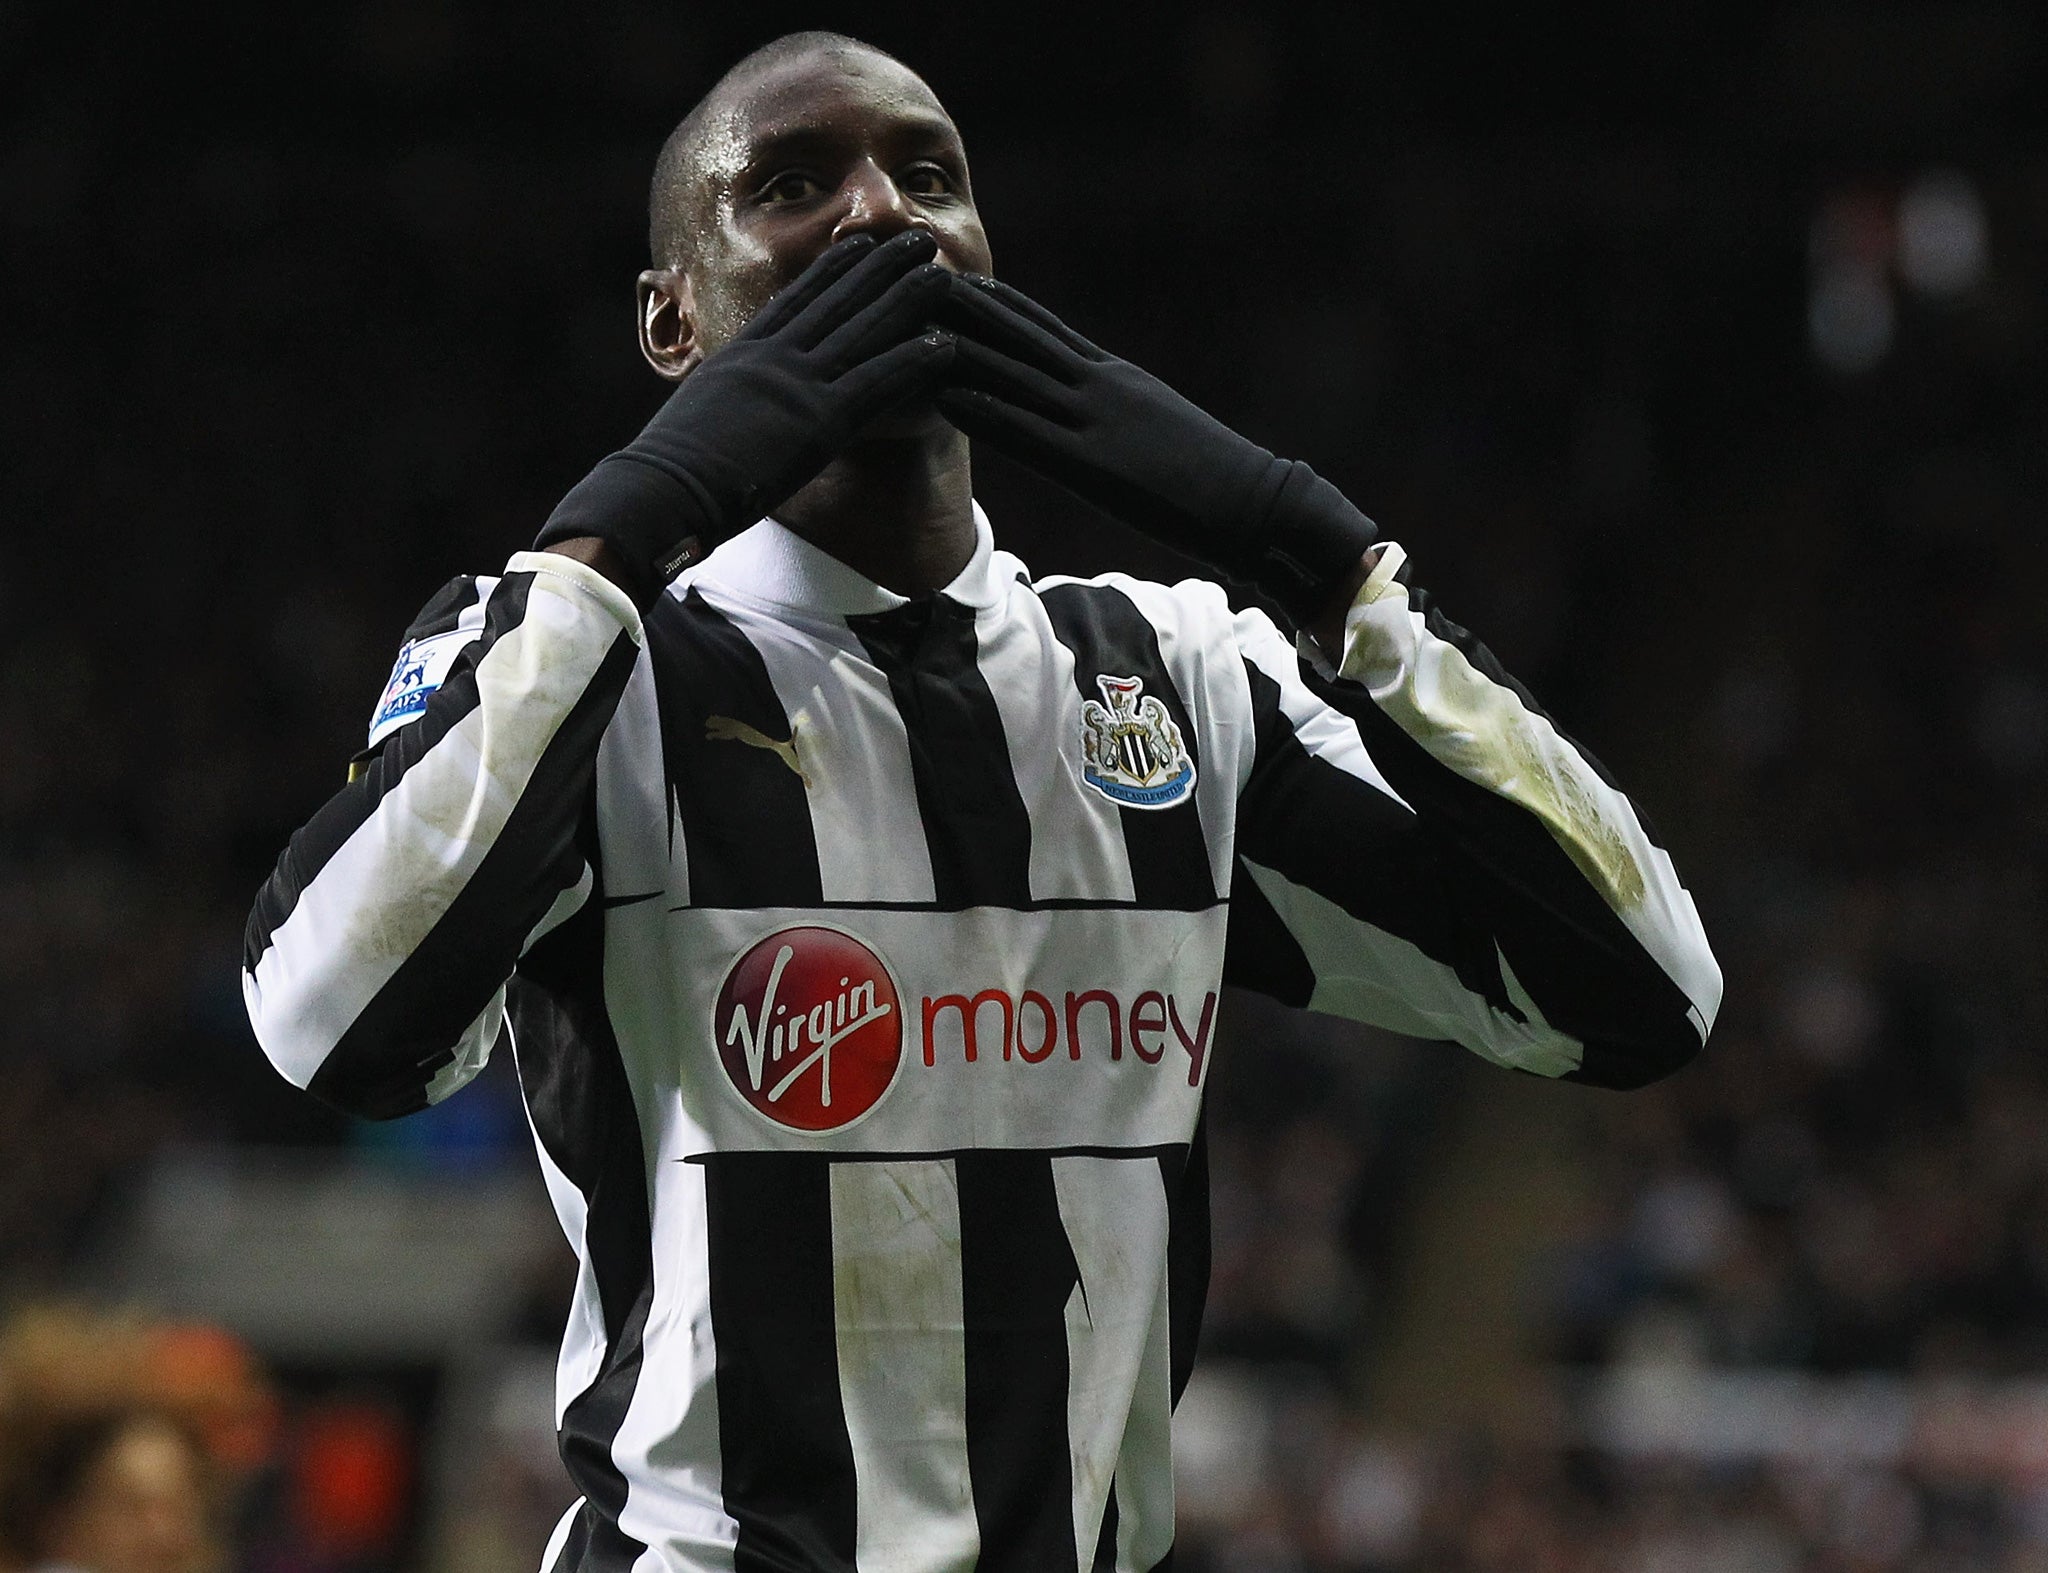 Chelsea have pulled out of talks for Newcastle's Demba Ba, who wants £80,000-per-week deal